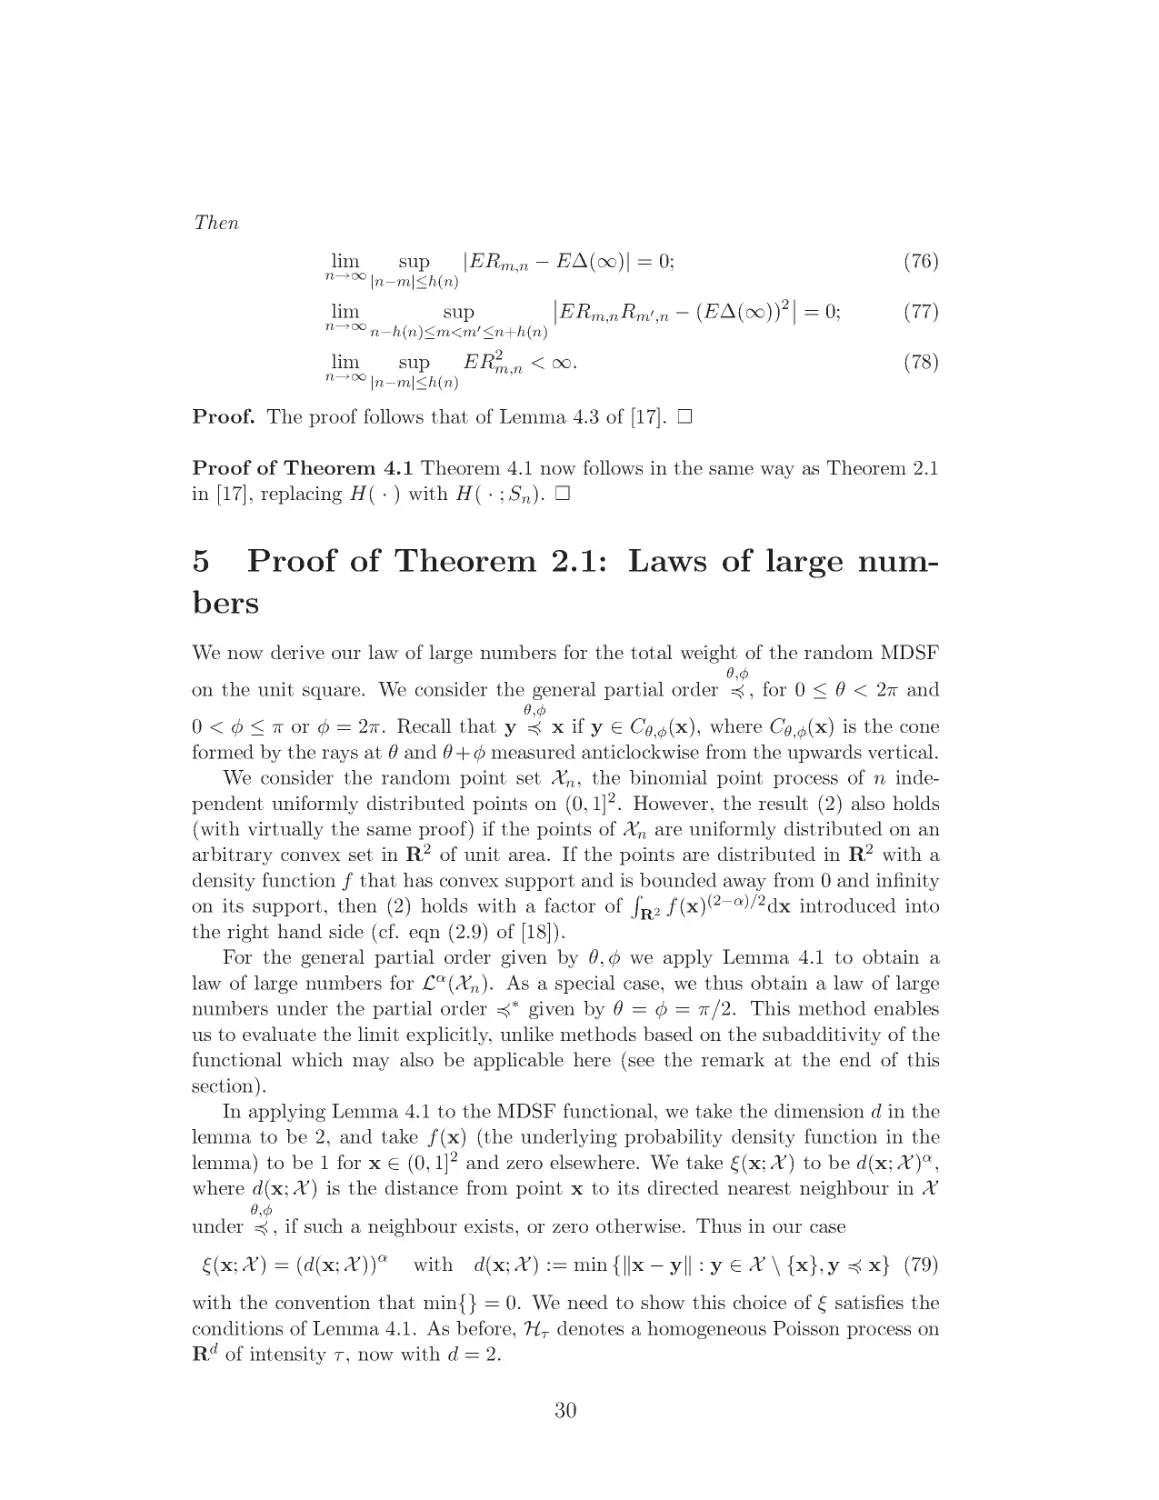 Proof of Theorem ??: Laws of large numbers